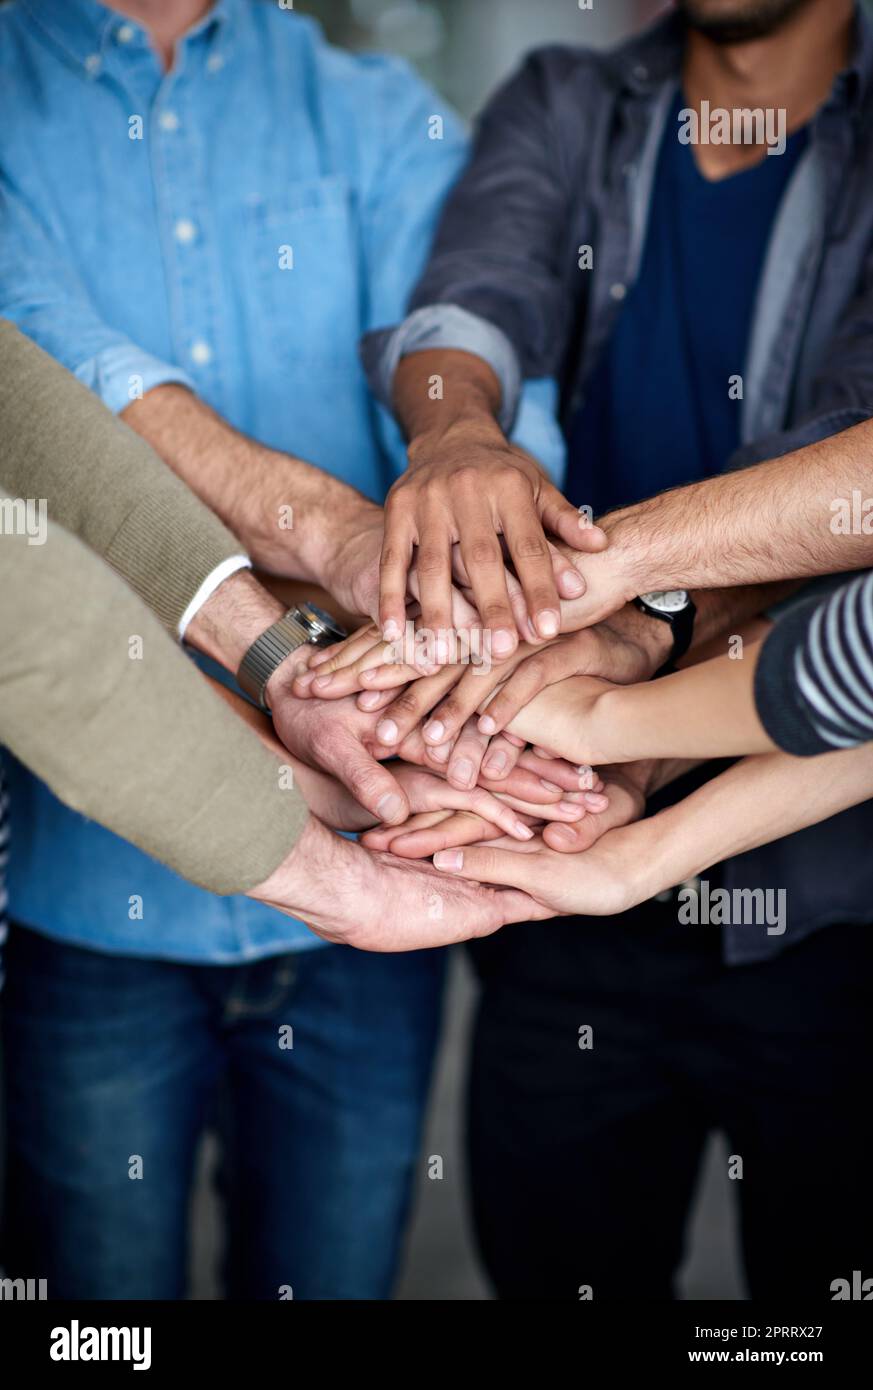 Bring it in for the team. Cropped view of a multi ethnic group putting their hands together in unity. Stock Photo